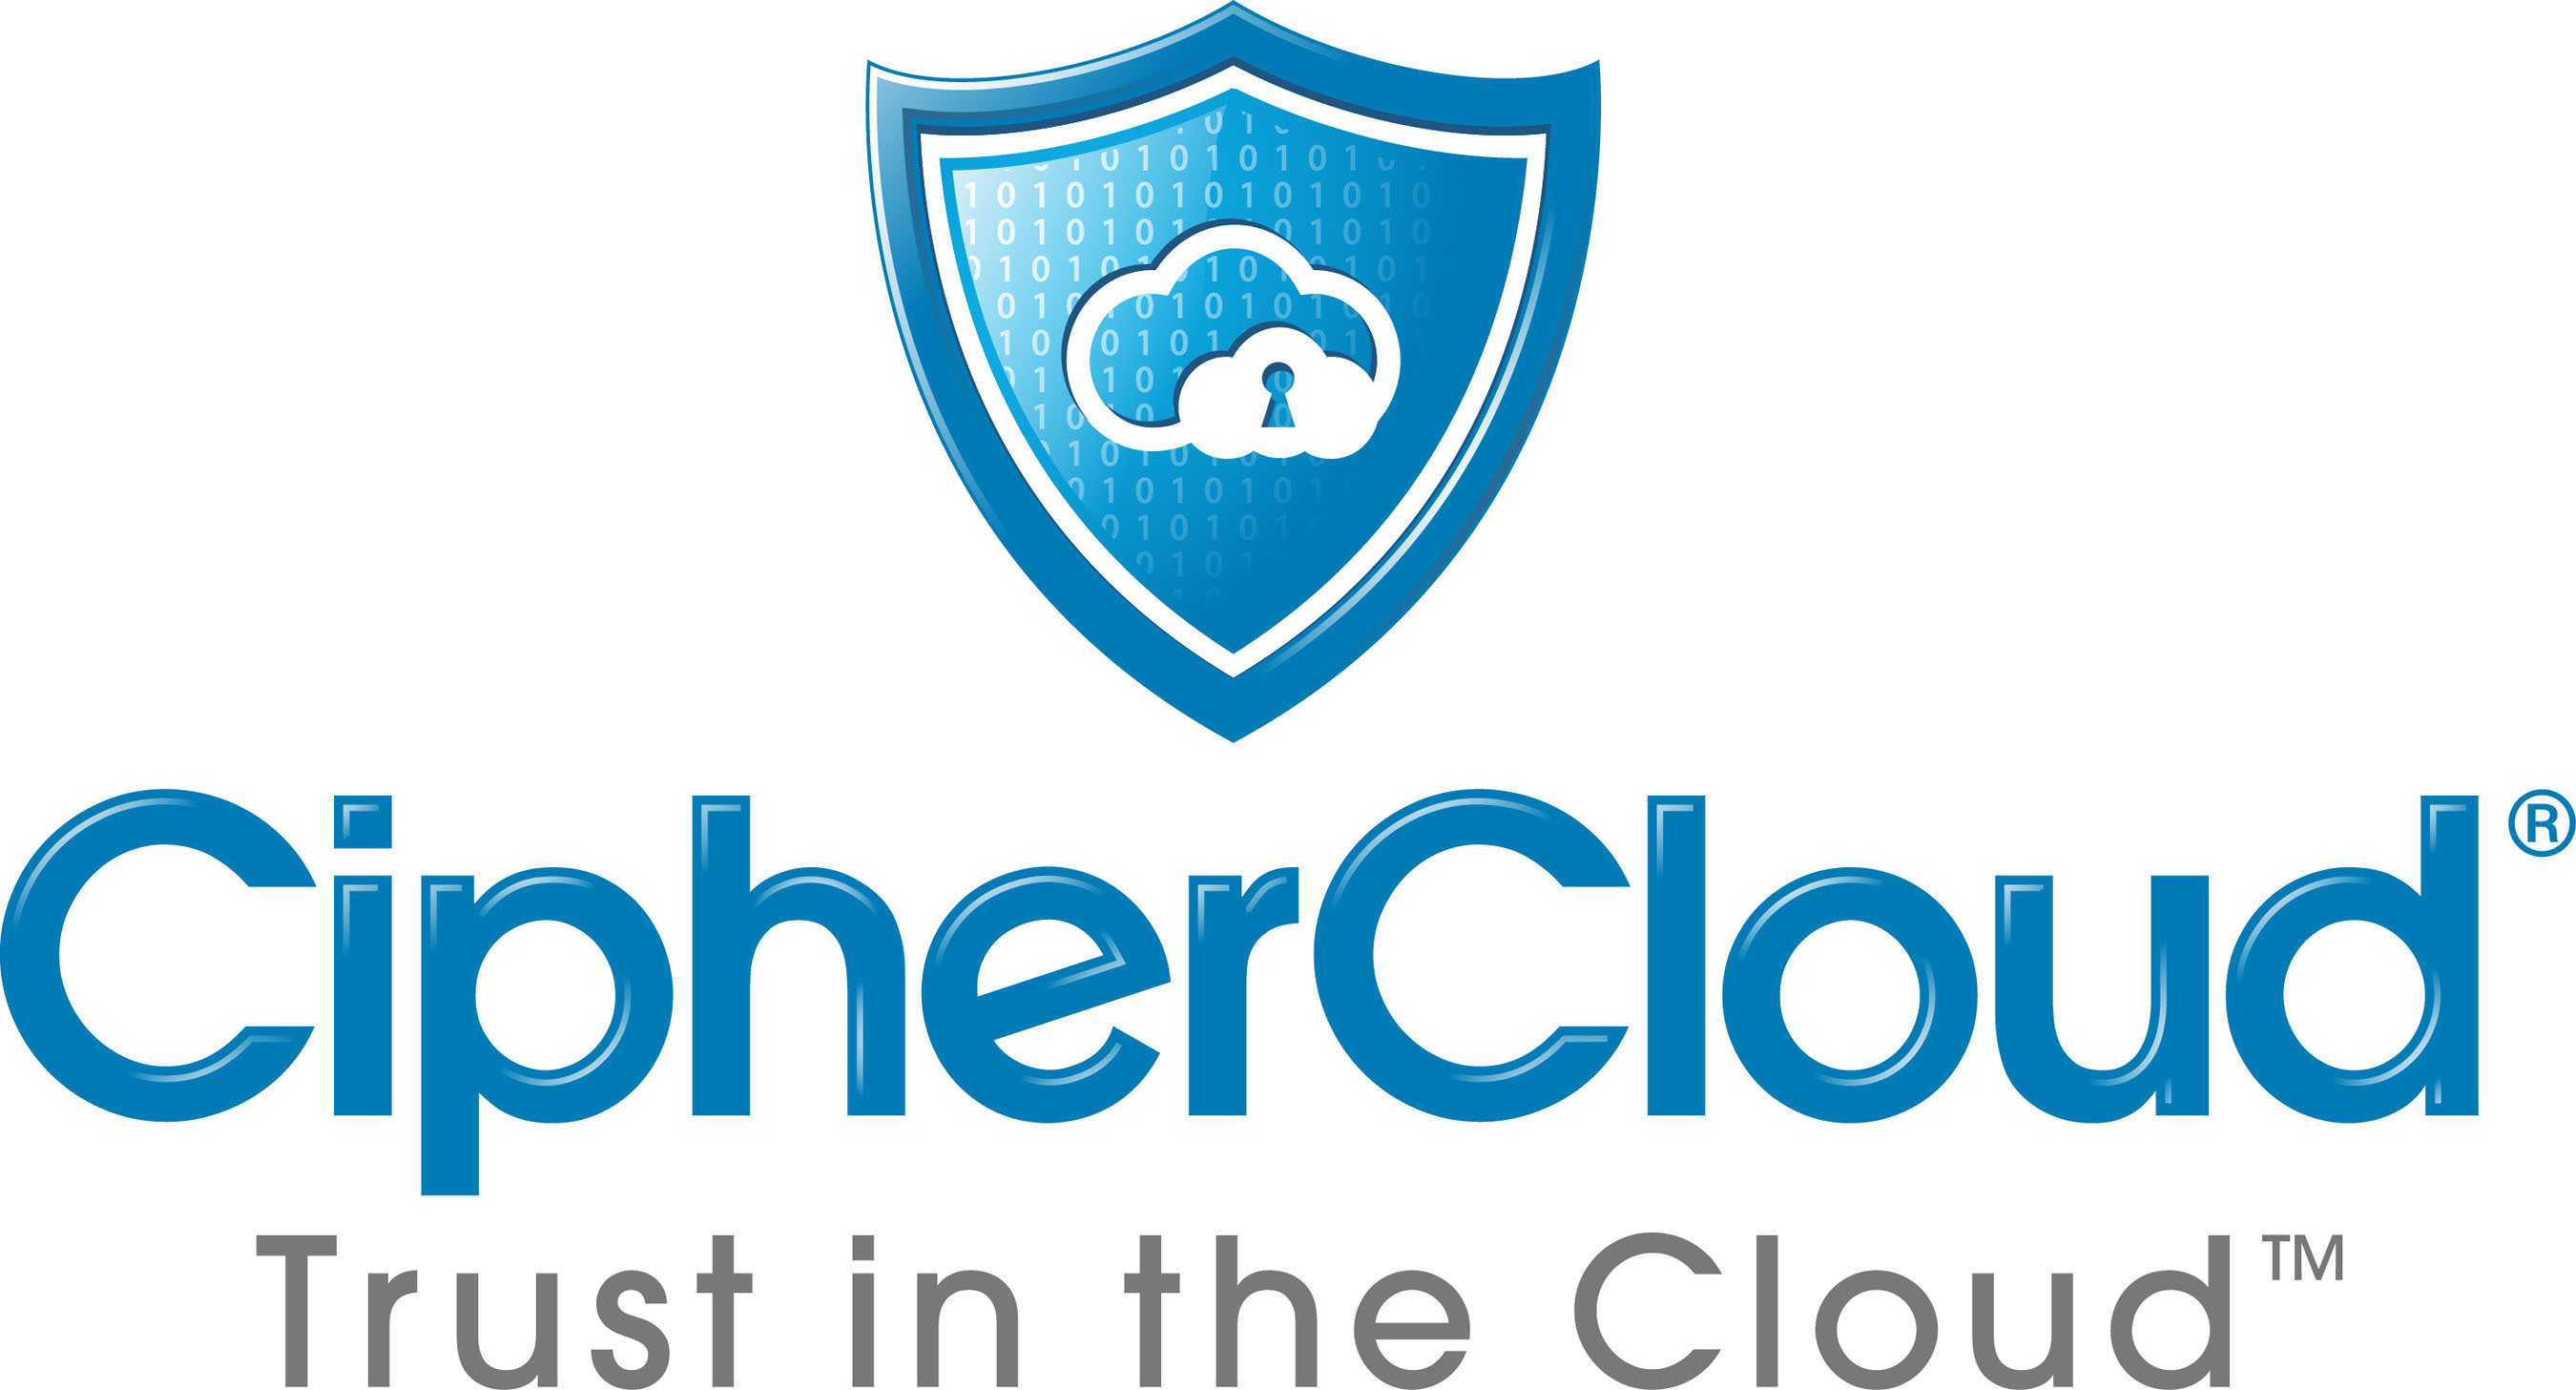 CipherCloud, the leader in cloud information protection, enables organizations to securely adopt cloud applications by overcoming data privacy, residency, security, and regulatory compliance risks. CipherCloud's open platform provides comprehensive security controls including encryption, tokenization, cloud data loss prevention, cloud malware detection, and activity monitoring. The CipherCloud product portfolio protects popular cloud applications out-of-the-box such as Salesforce, Force.com, Chatter, Box, Google Gmail, Microsoft Office 365, and Amazon Web Services. CipherCloud's ground breaking technology protects sensitive information in real time, before it is sent to the cloud, while preserving application usability and functionality for its more than 1.2 million business users.